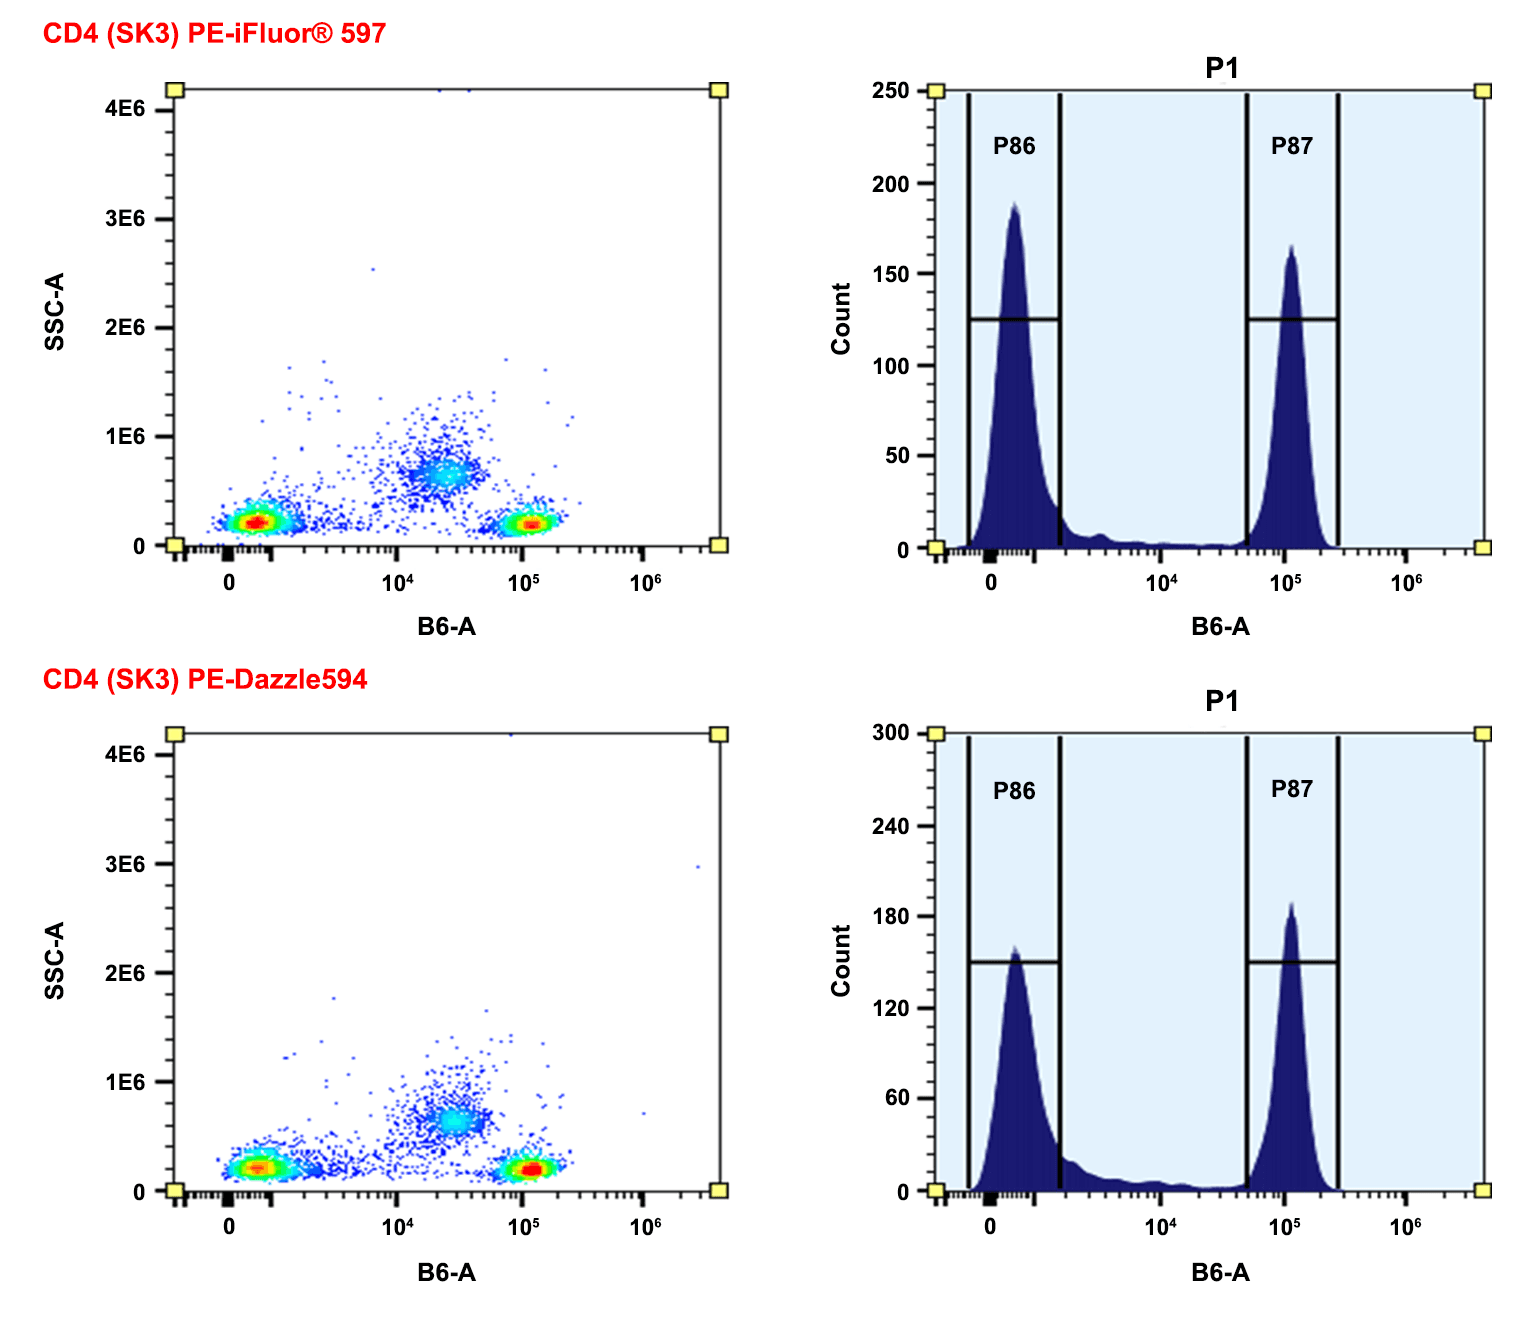 Comparison of CD4+ signal using fluorophore-labeled antibody conjugates. Human peripheral blood mononuclear cells (PBMCs) were isolated and stained using AAT Bioquest PE/iFluor® 597 anti-human CD4 conjugates (top) or Biolegend PE/Dazzle™ 594 anti-human CD conjugates (bottom). The fluorescence signal was monitored using an Aurora spectral flow cytometer in the PE/iFluor® 597 specific B6-A channel.